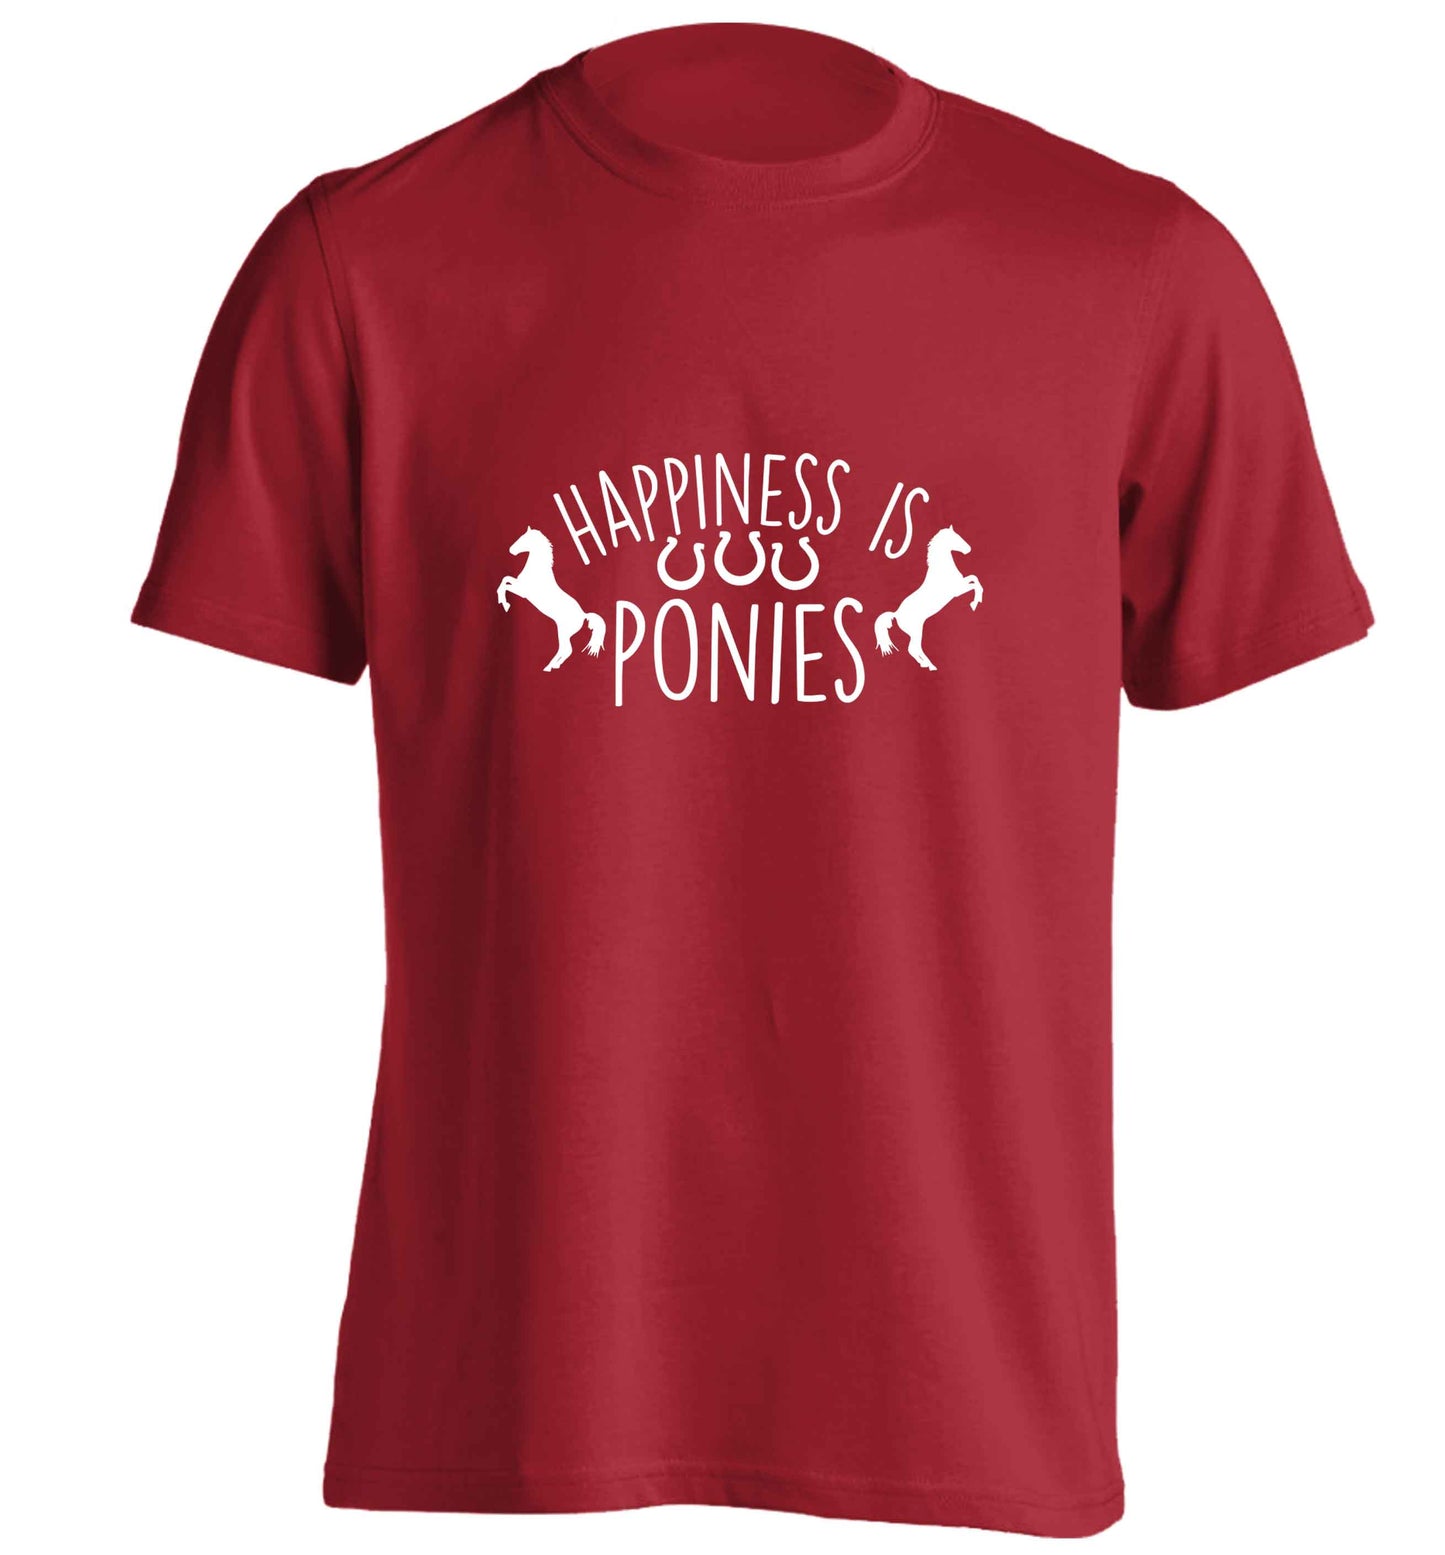 Happiness is ponies adults unisex red Tshirt 2XL